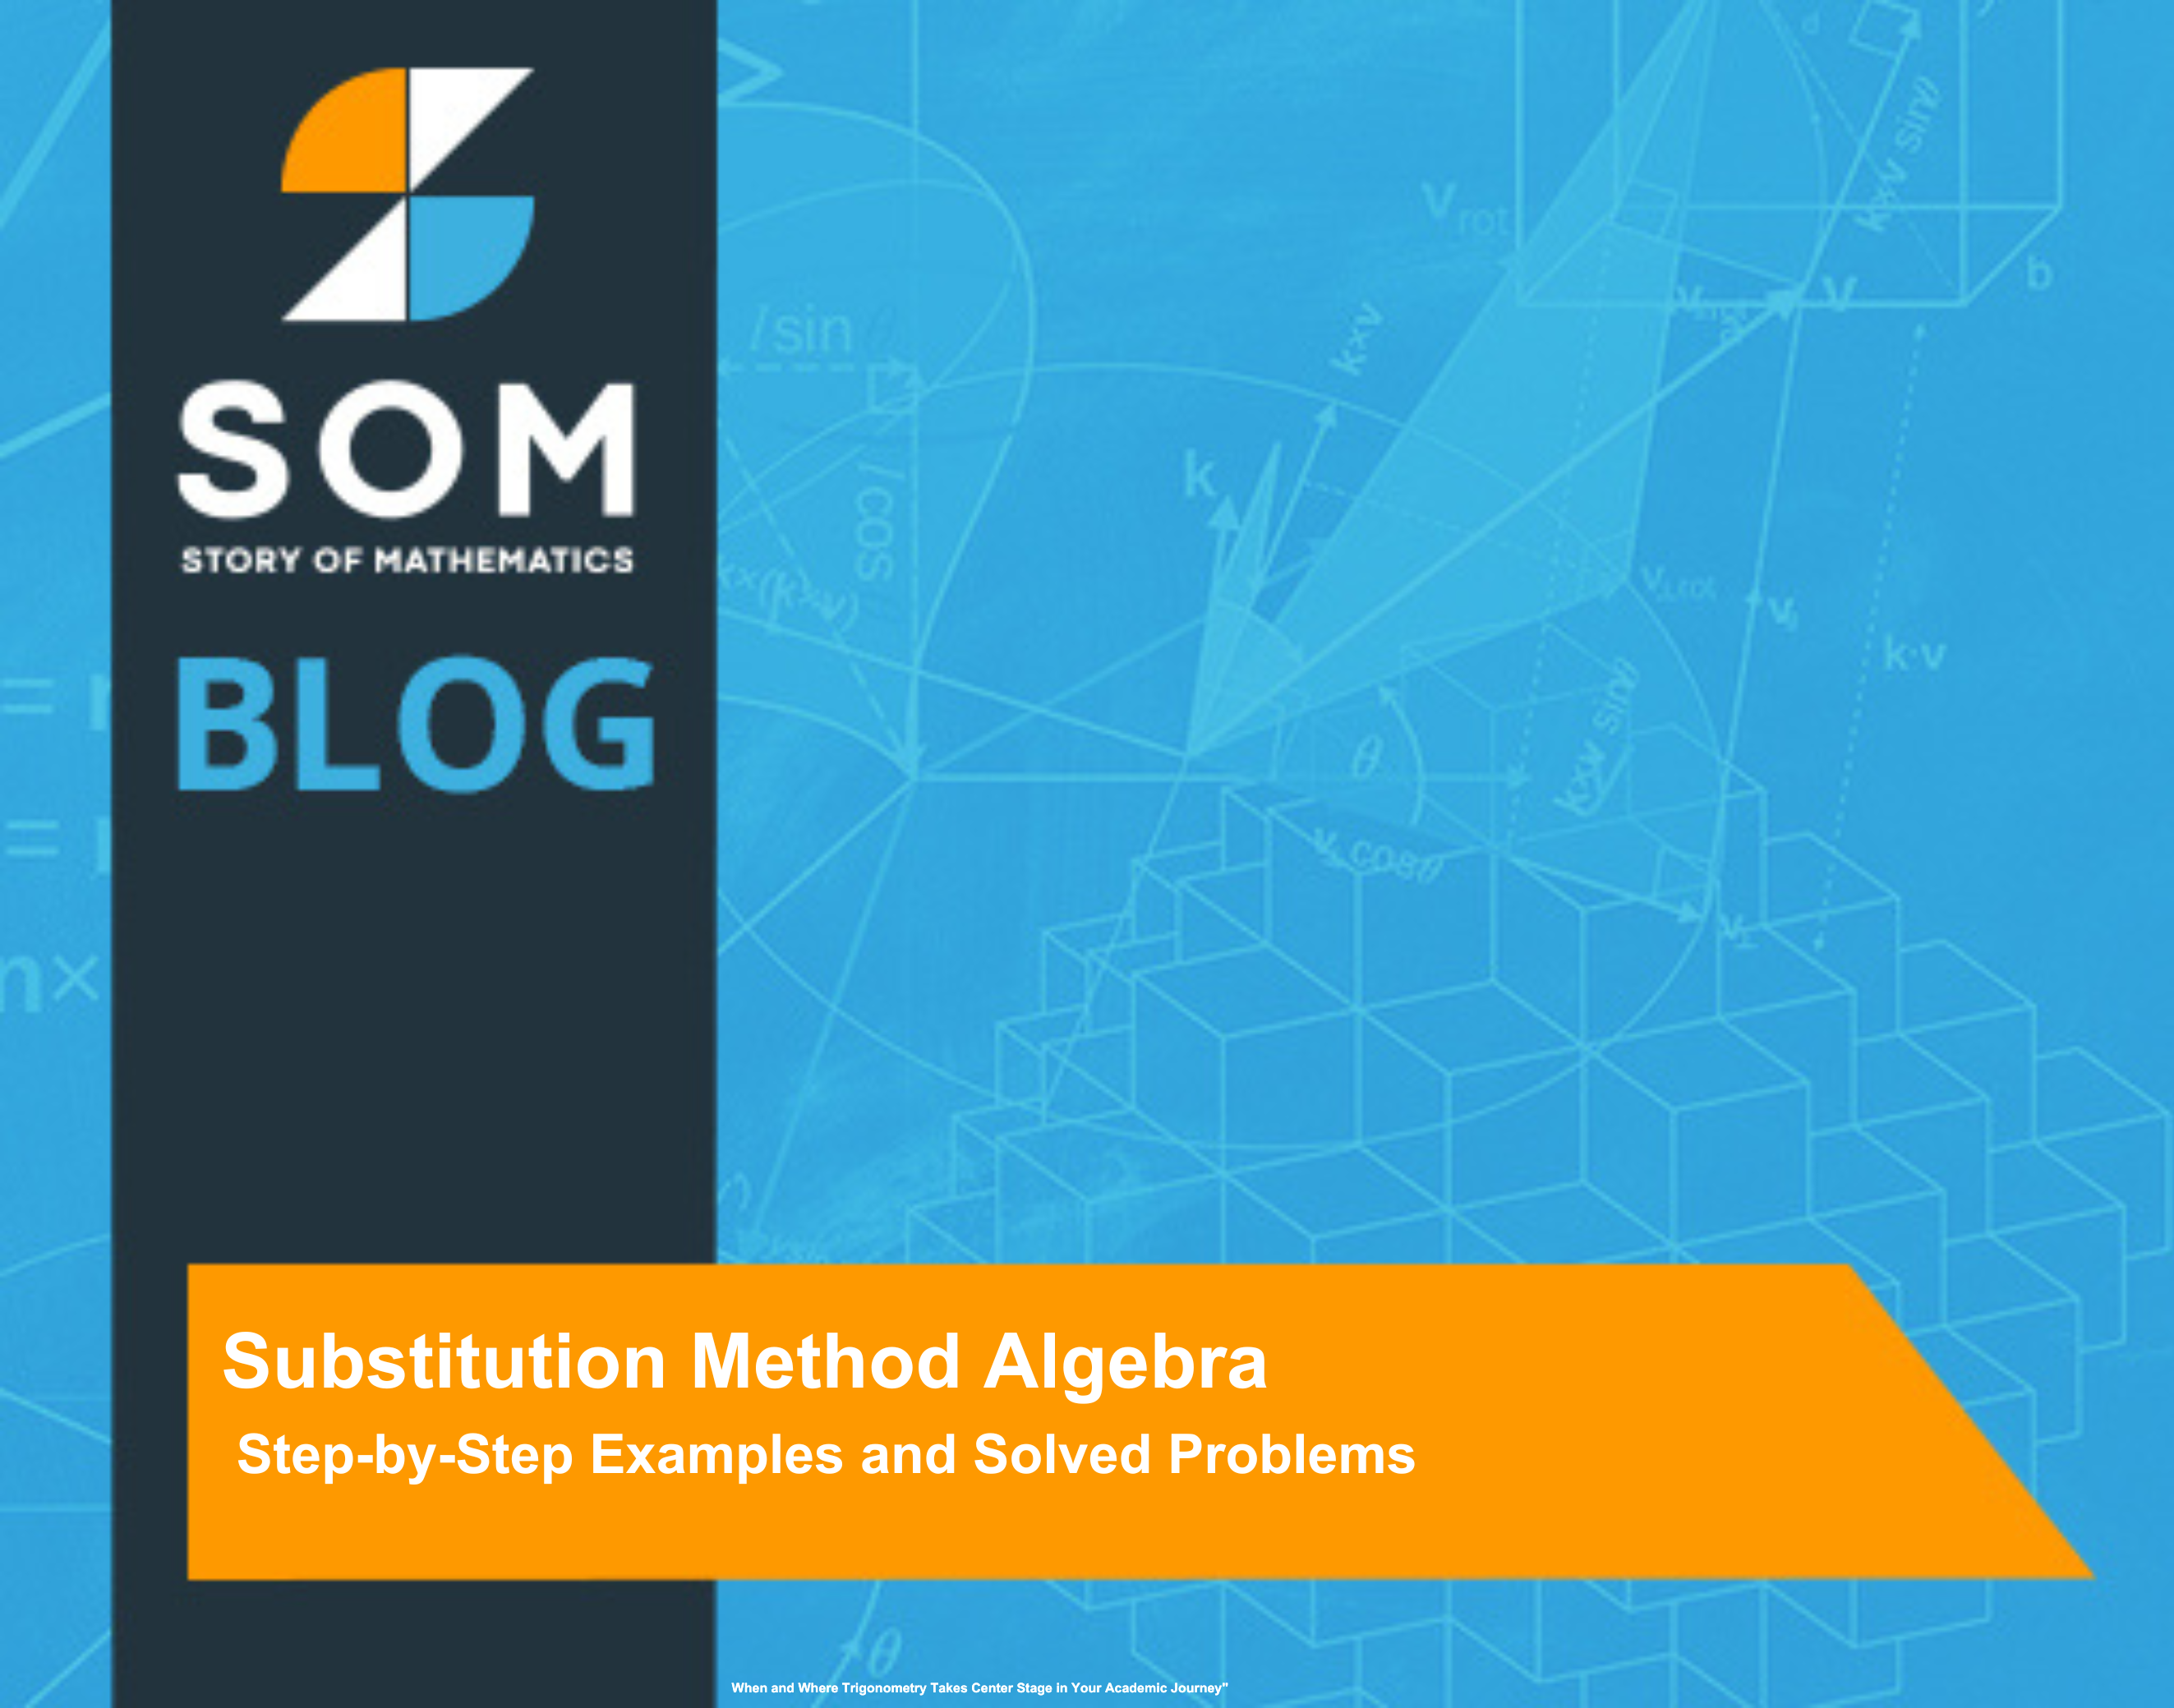 Feature Image Substitution Method Algebra Step-by-Step Examples and Solved Problems